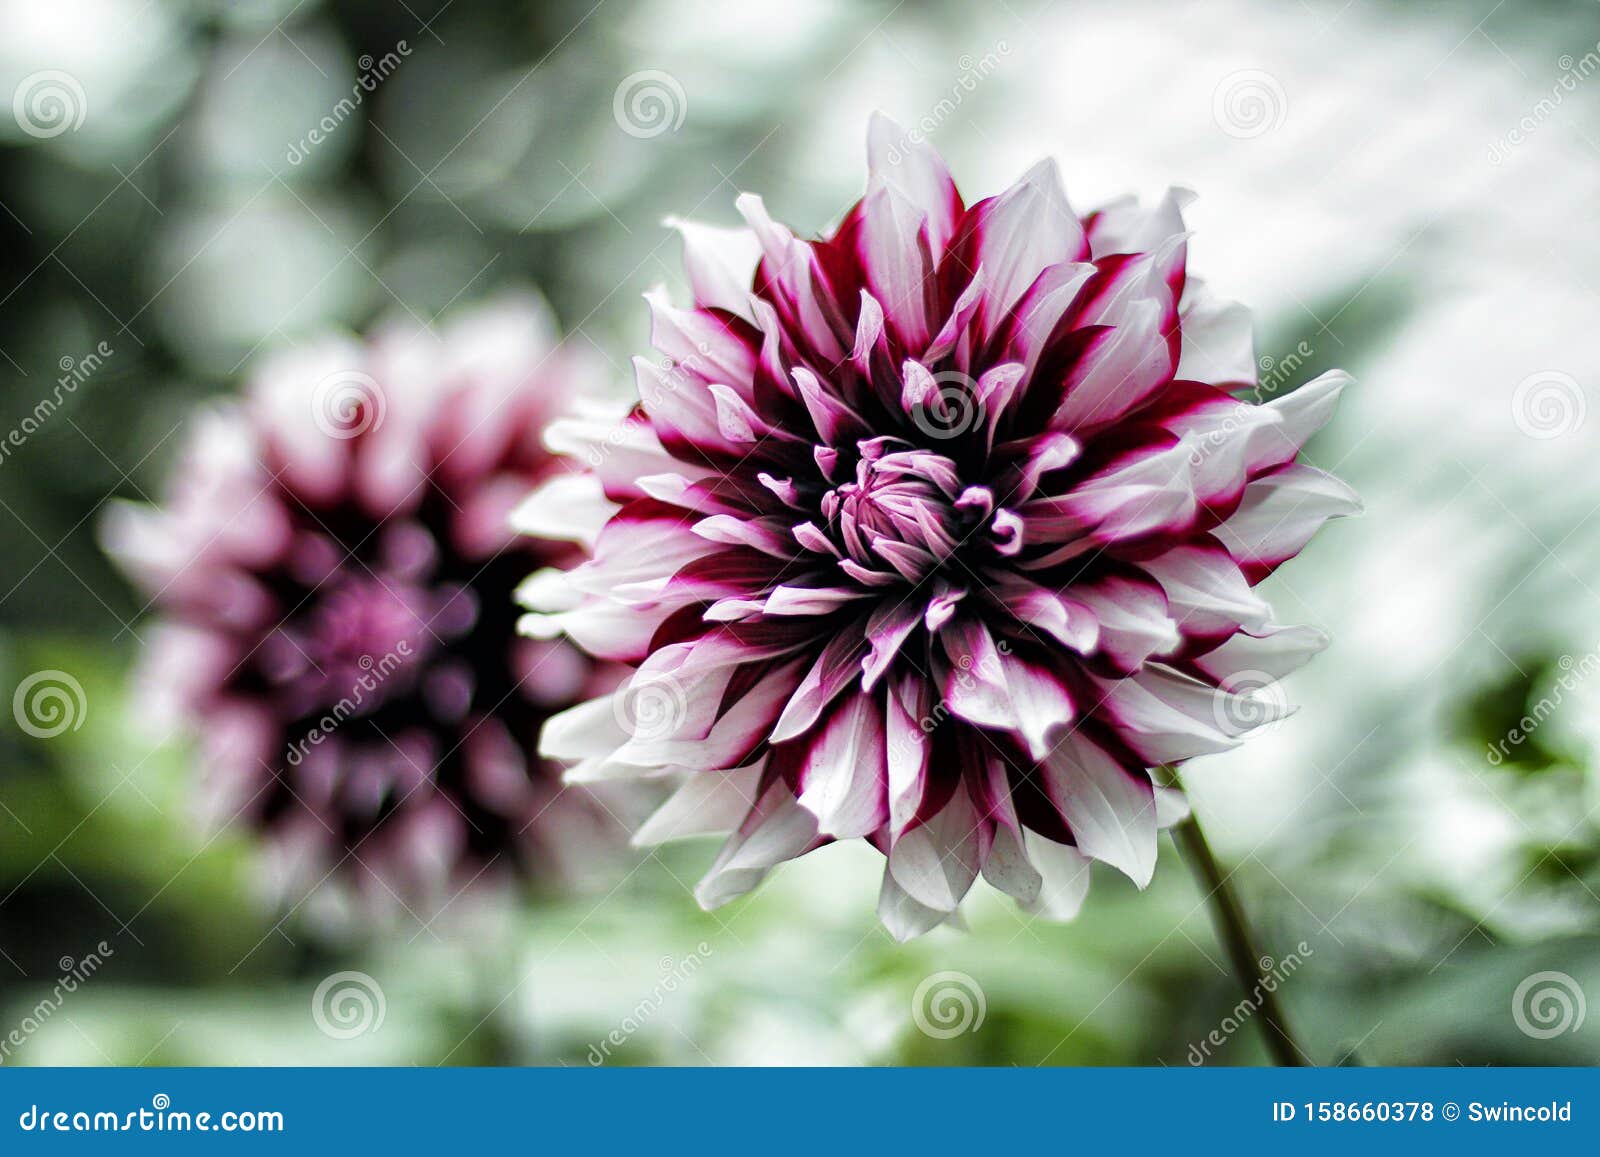 Black Pink Purple And White Gradation Color In Beautiful Flower Stock Photo Image Of Good First 158660378,Home Indian Baby Shower Decorations